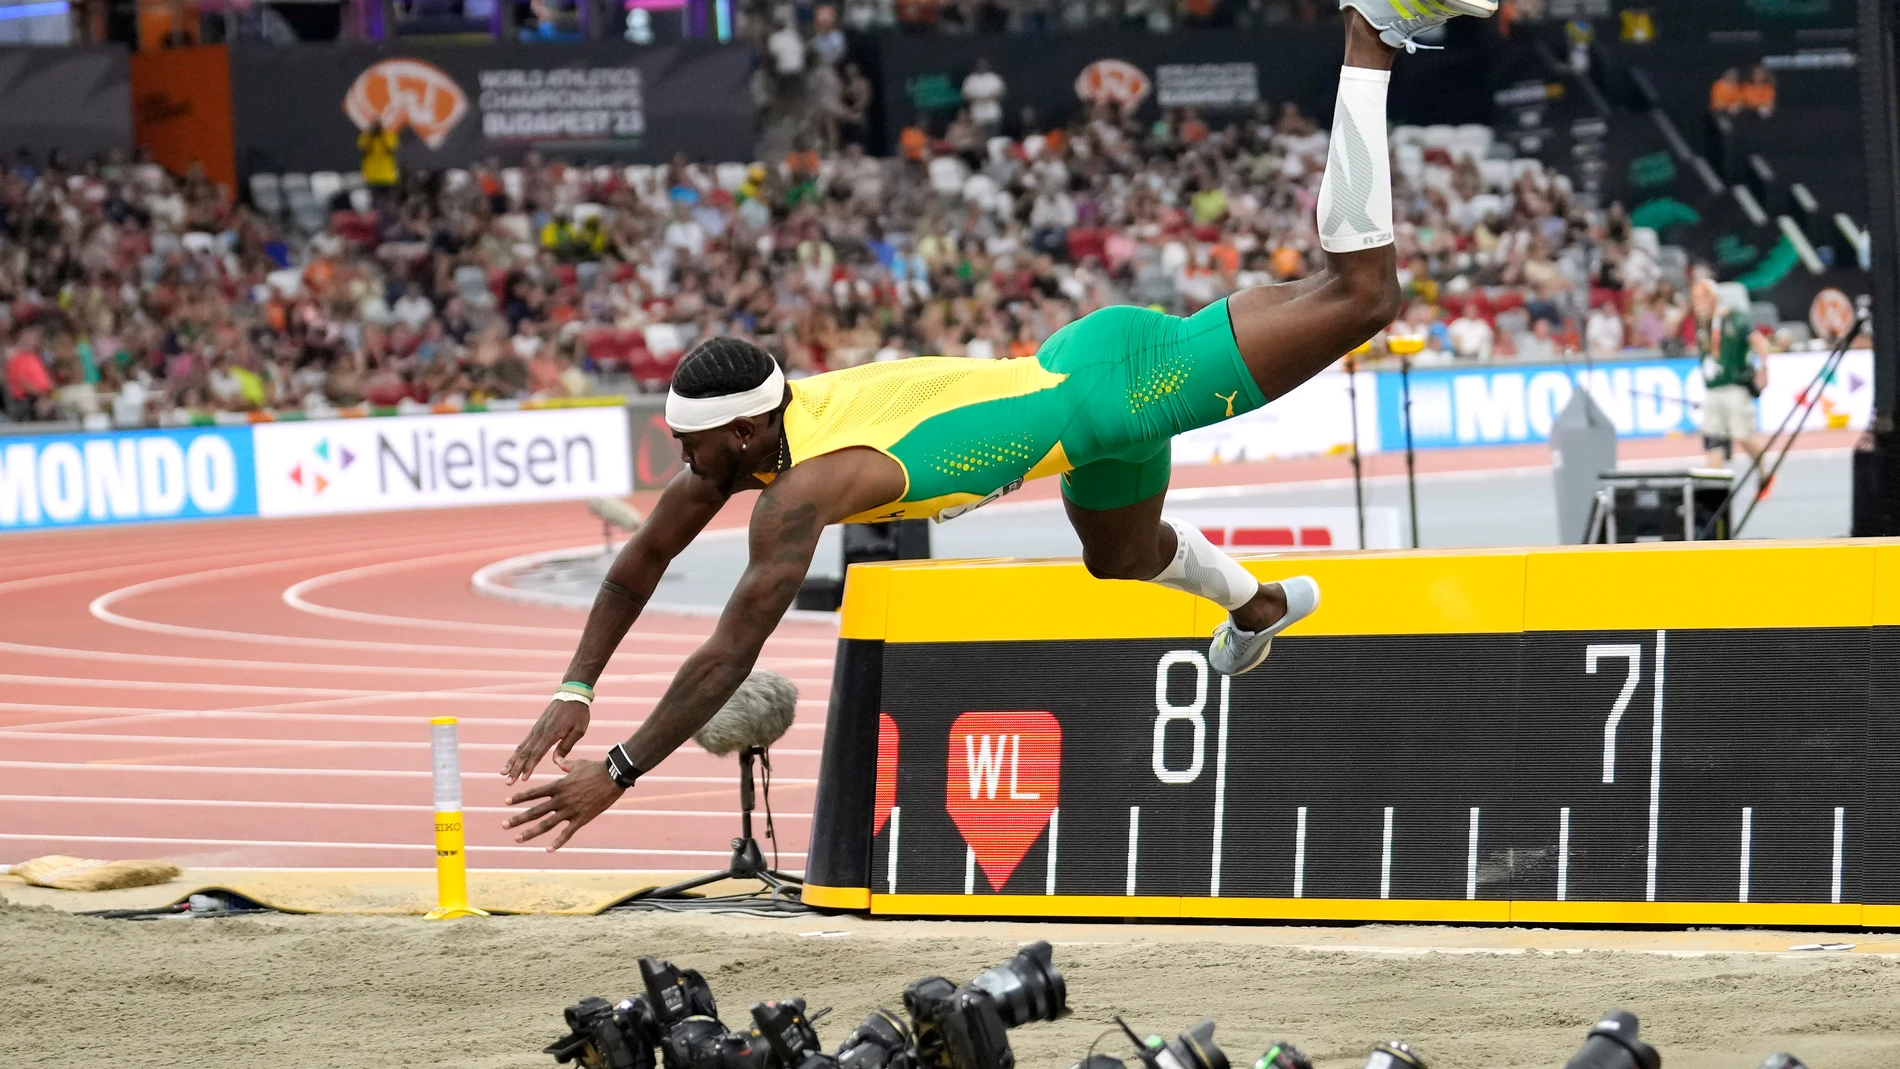 Carey Mcleod, of Jamaica, loses control as he competes in the men's long jump final during the World Athletics Championships in Budapest, Hungary, Thursday, Aug. 24, 2023. (AP Photo/Ashley Landis)